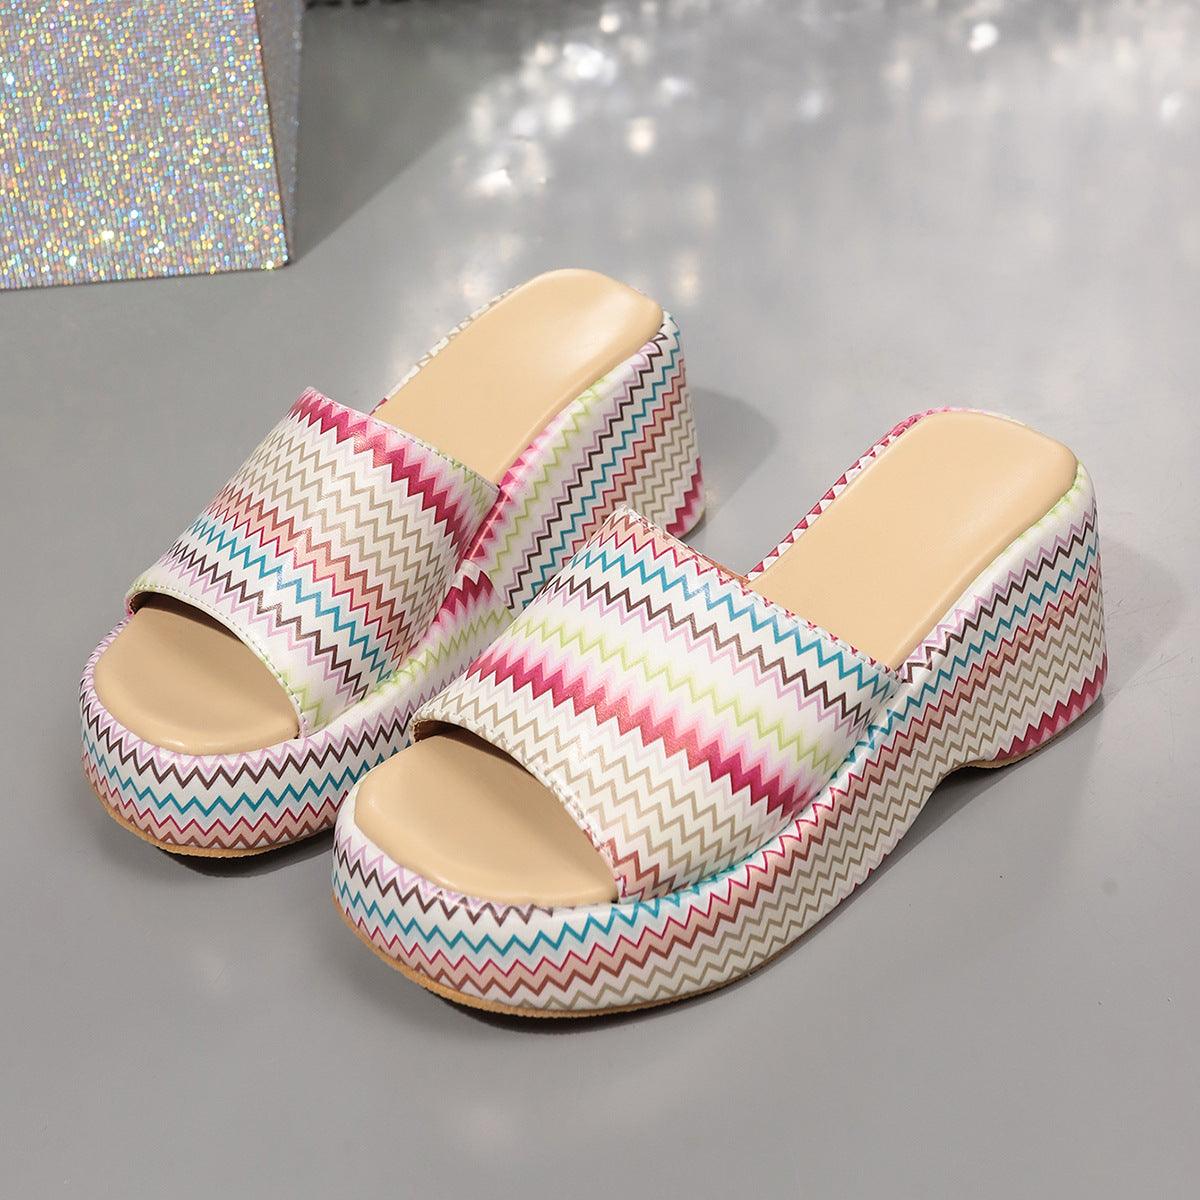 Women's Shoes - Sandals Printed Open Toe Wedge Sandals